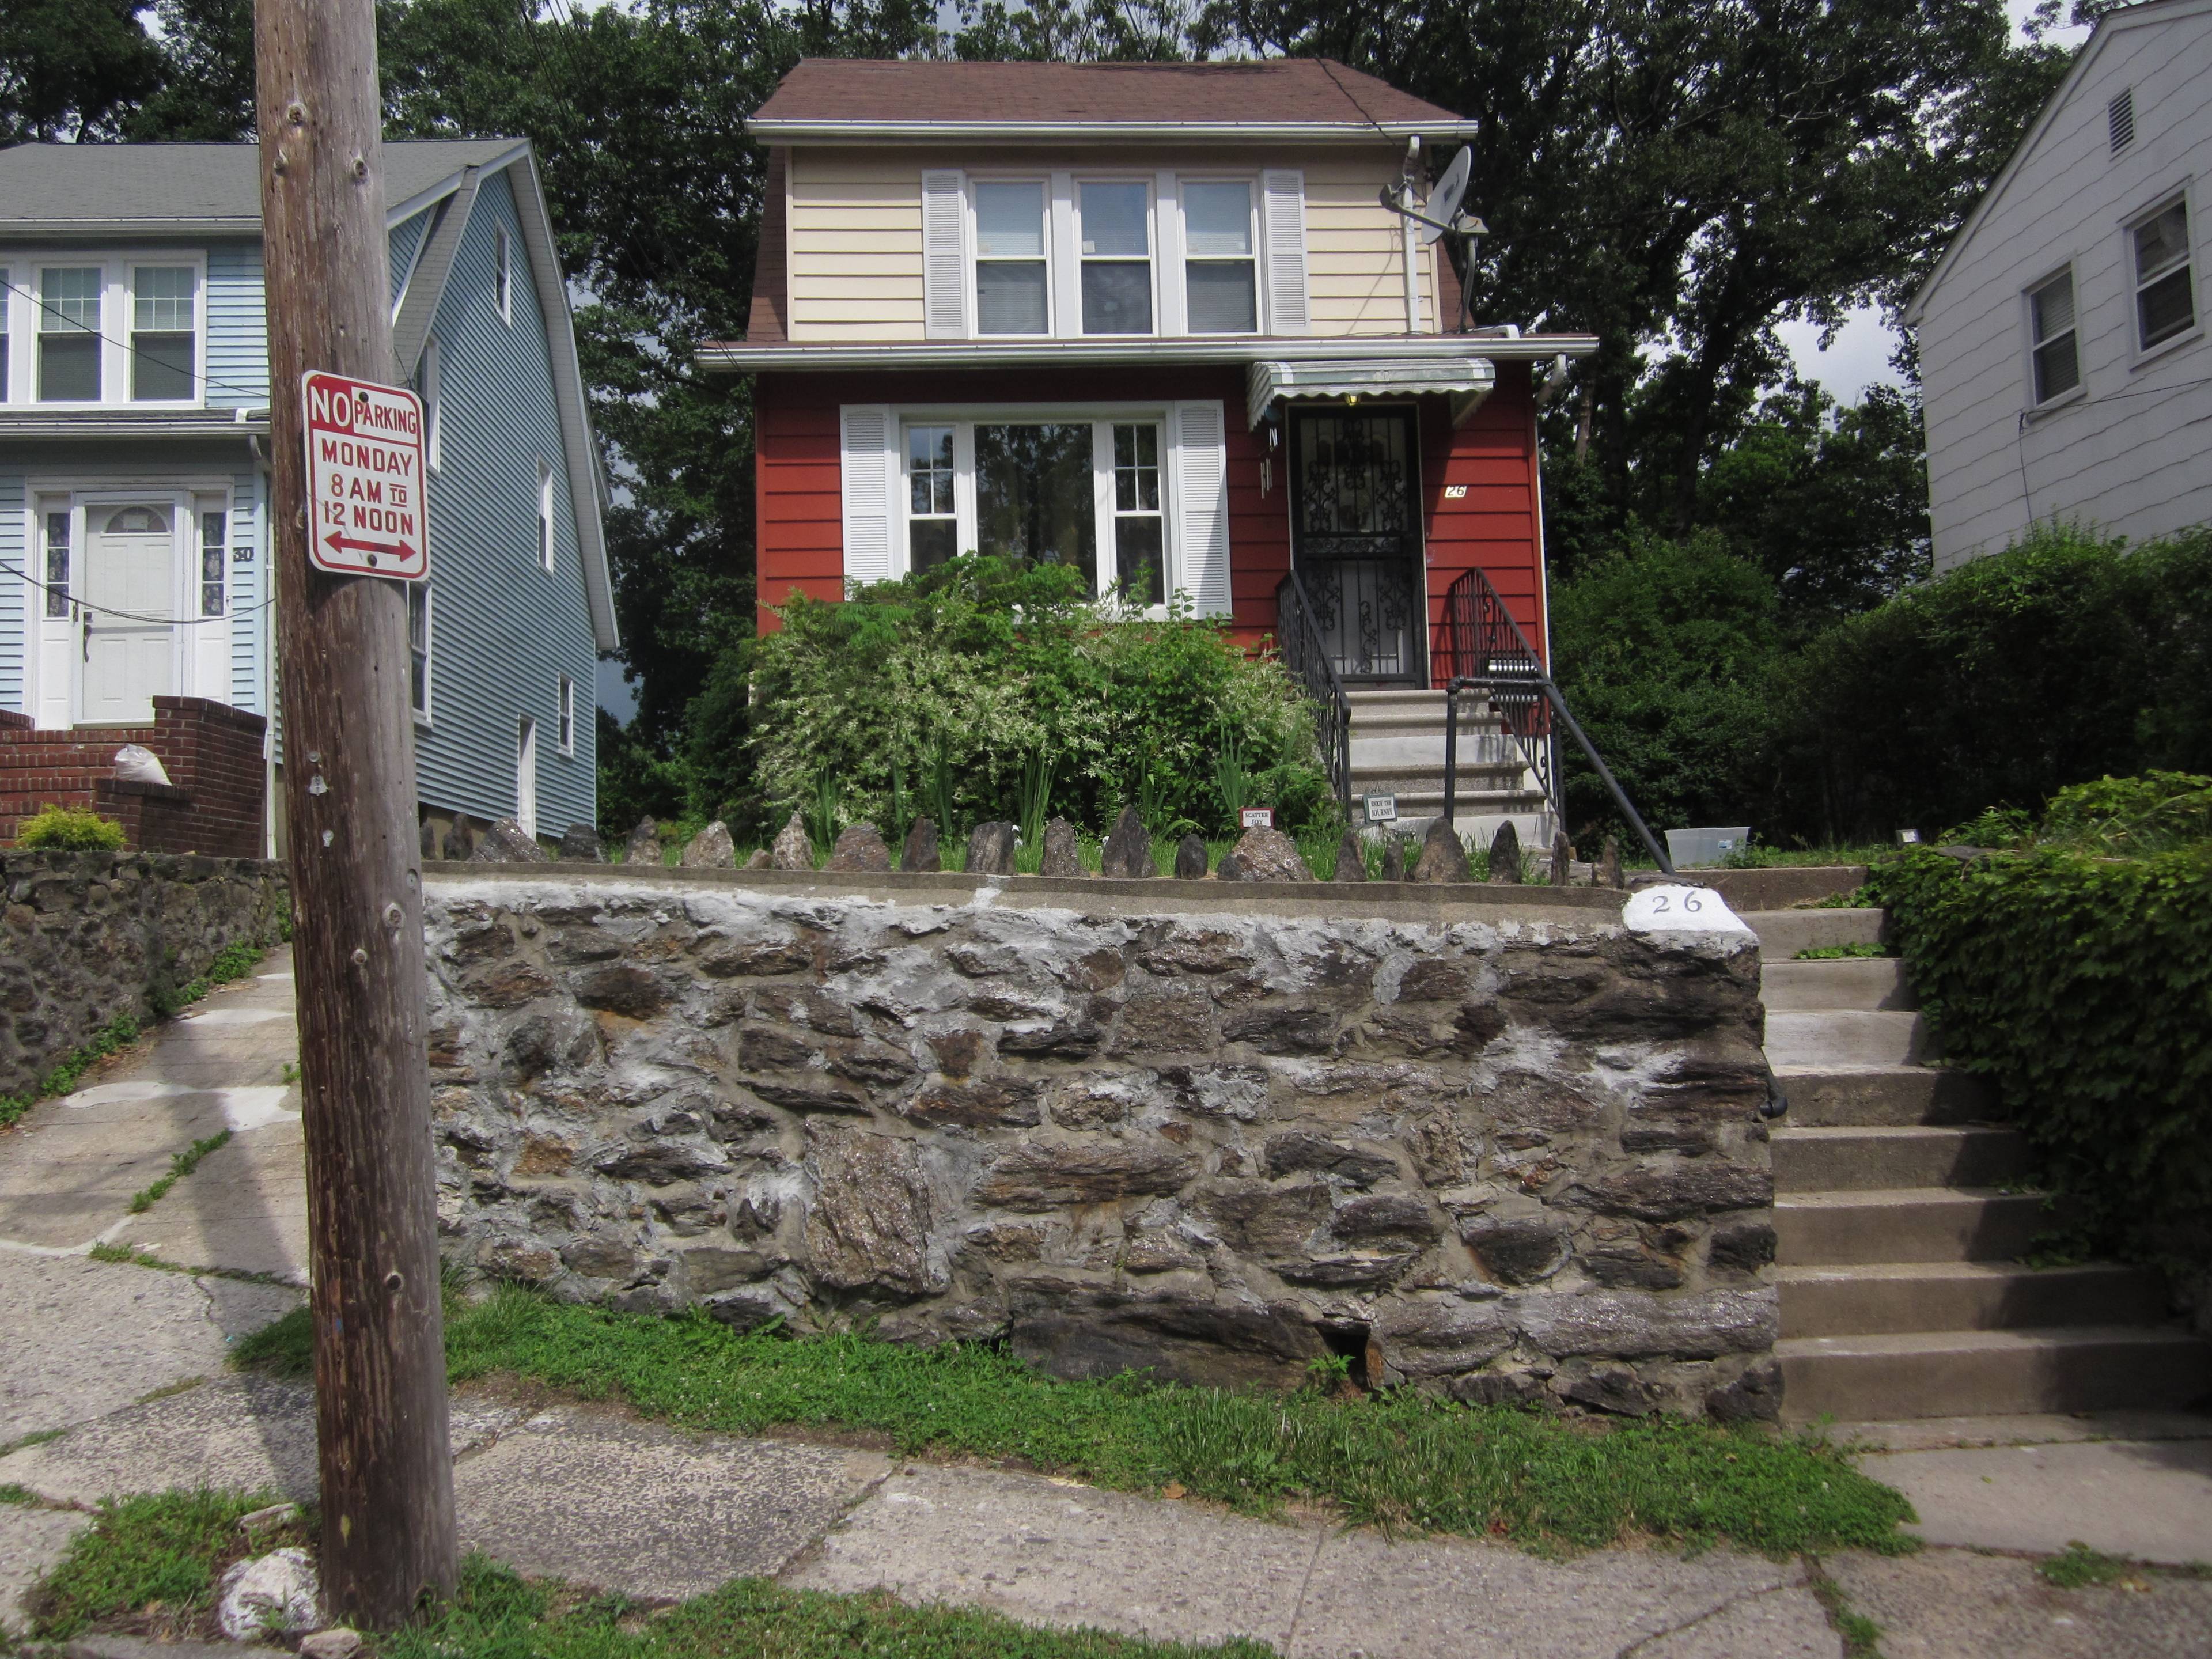 FOUR BEDROOM DETACHADE HOUSE FOR SALE IN MT. VERNON NEW YORK 10 MINUTES WALK TO NUMBER 5 SUBWAY WITH A GARAGE 